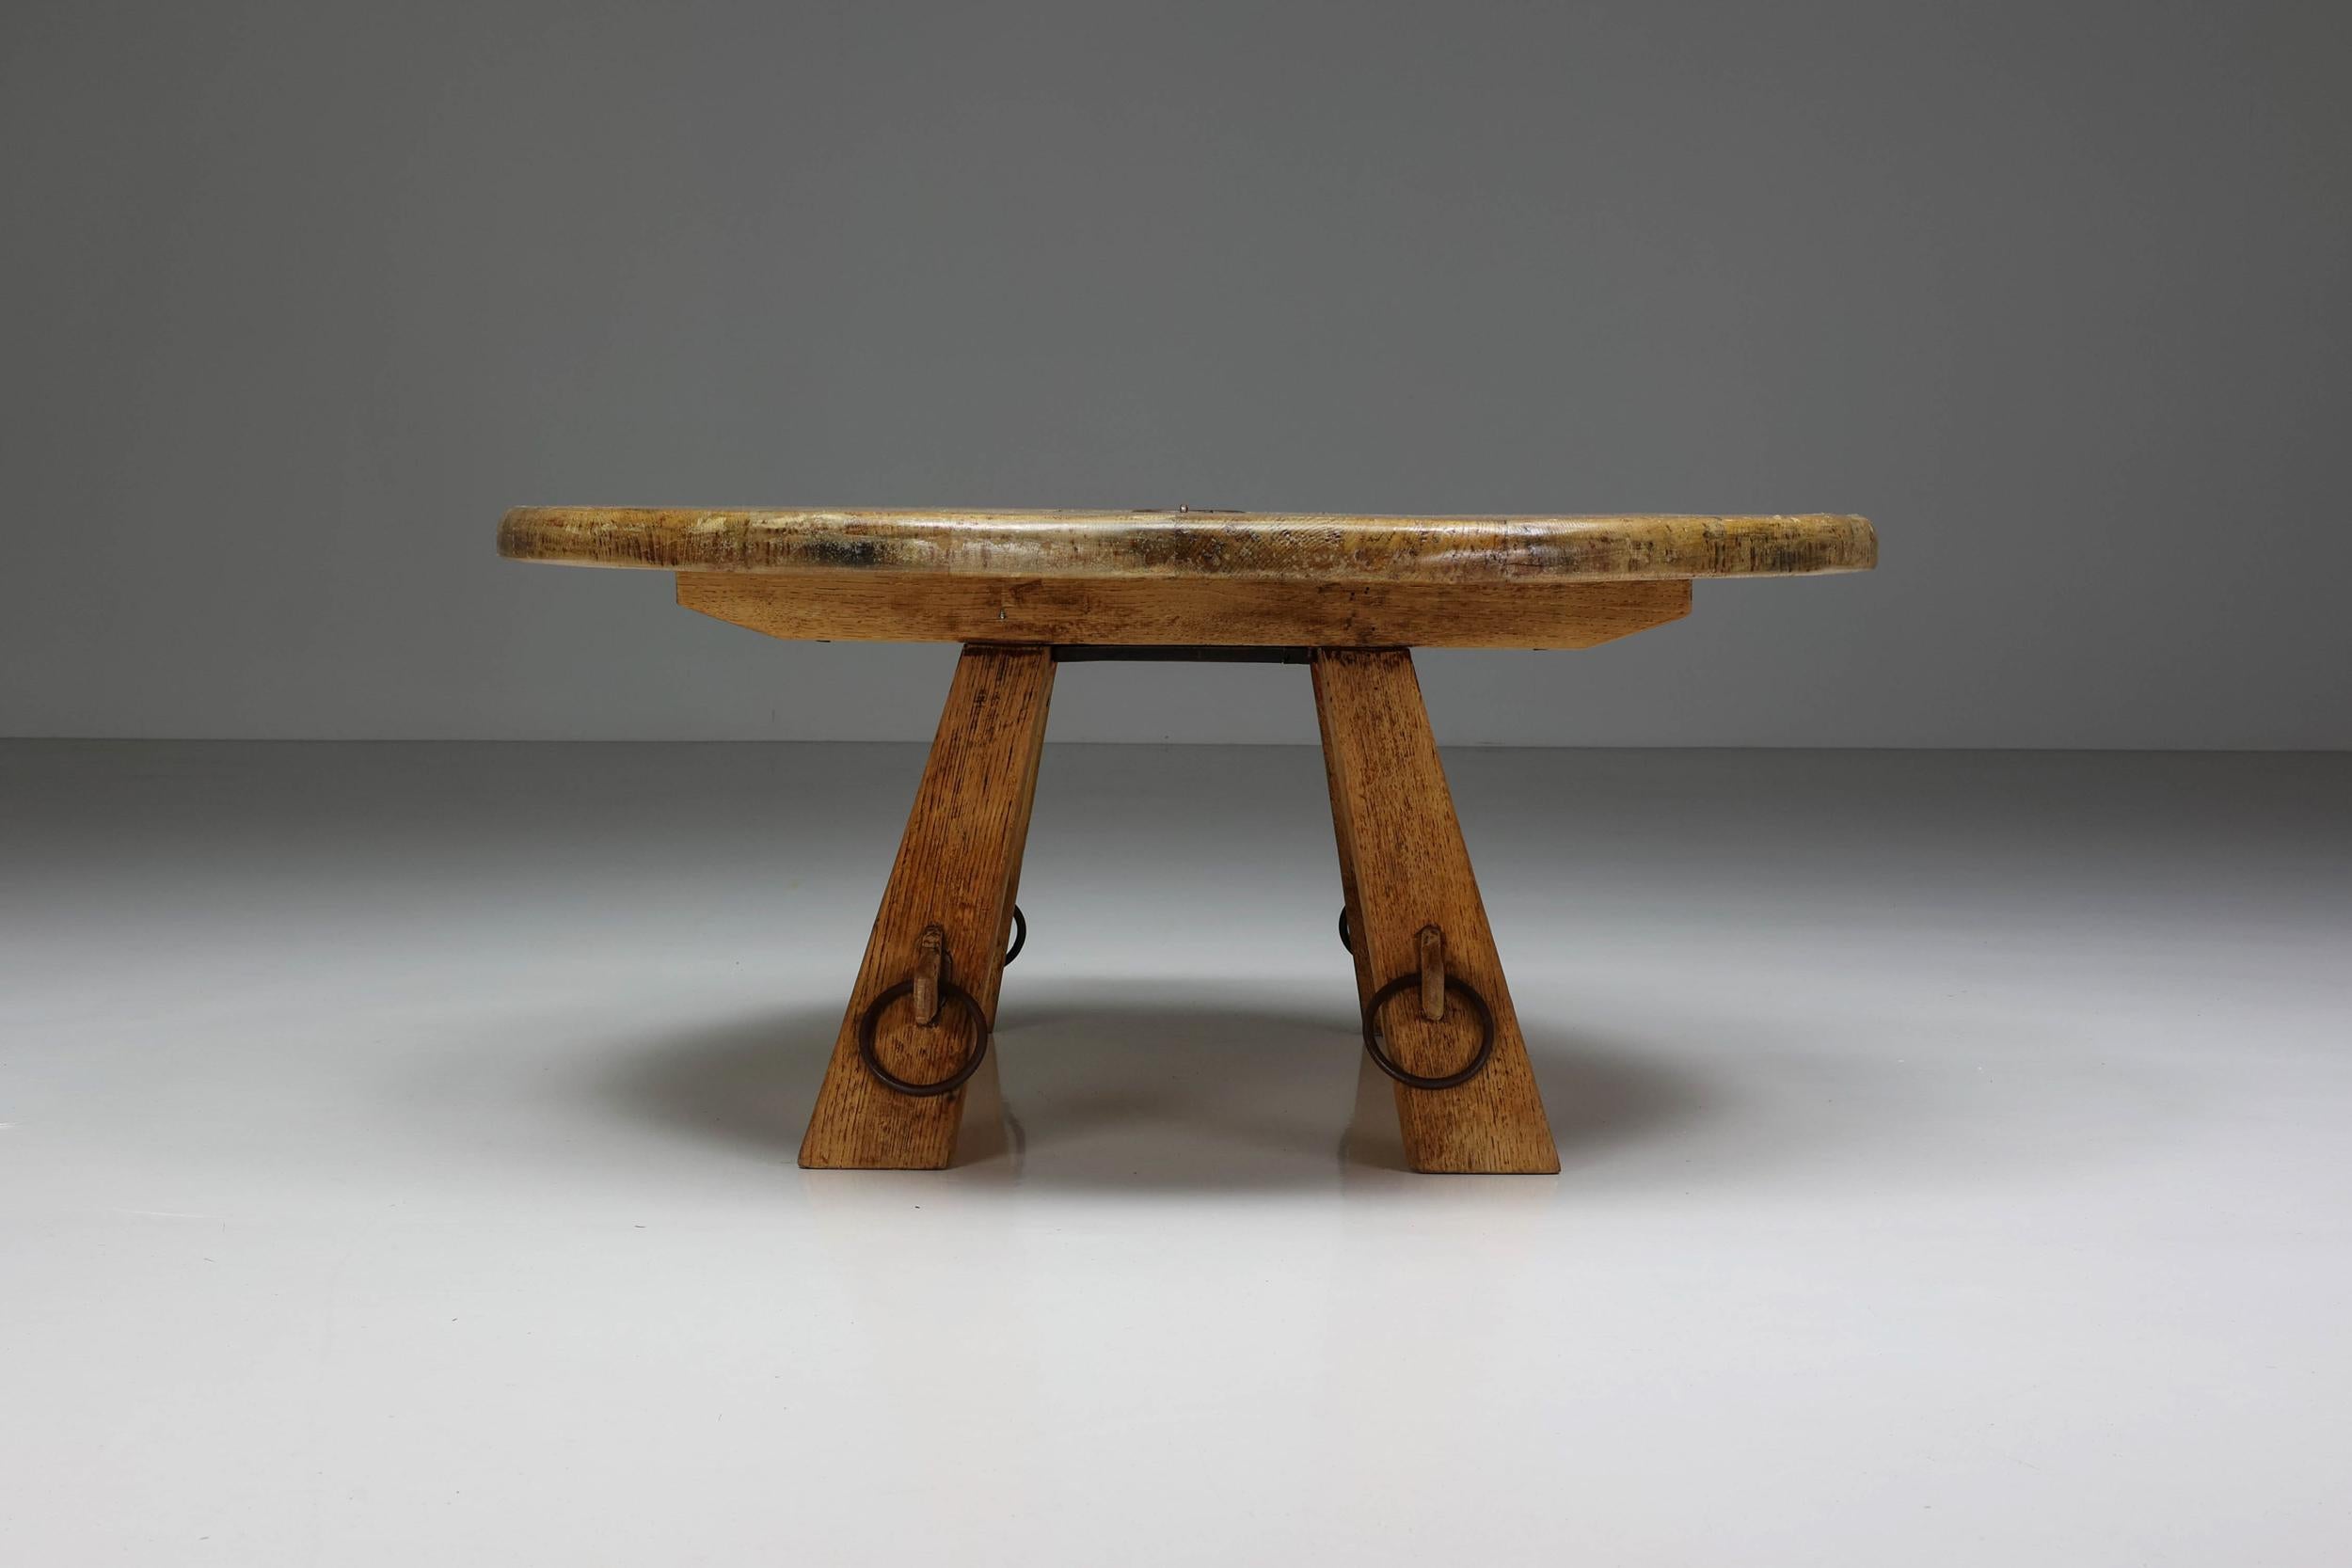 Coffee table; Craftmanship; Wabi-Sabi; Rustic; 1960's; Patina; Rustic furniture; France;

Rustic round coffee table with ring detail in the middle, a sign of impeccable craftsmanship. Embracing the principles of wabi-sabi, this side table shows